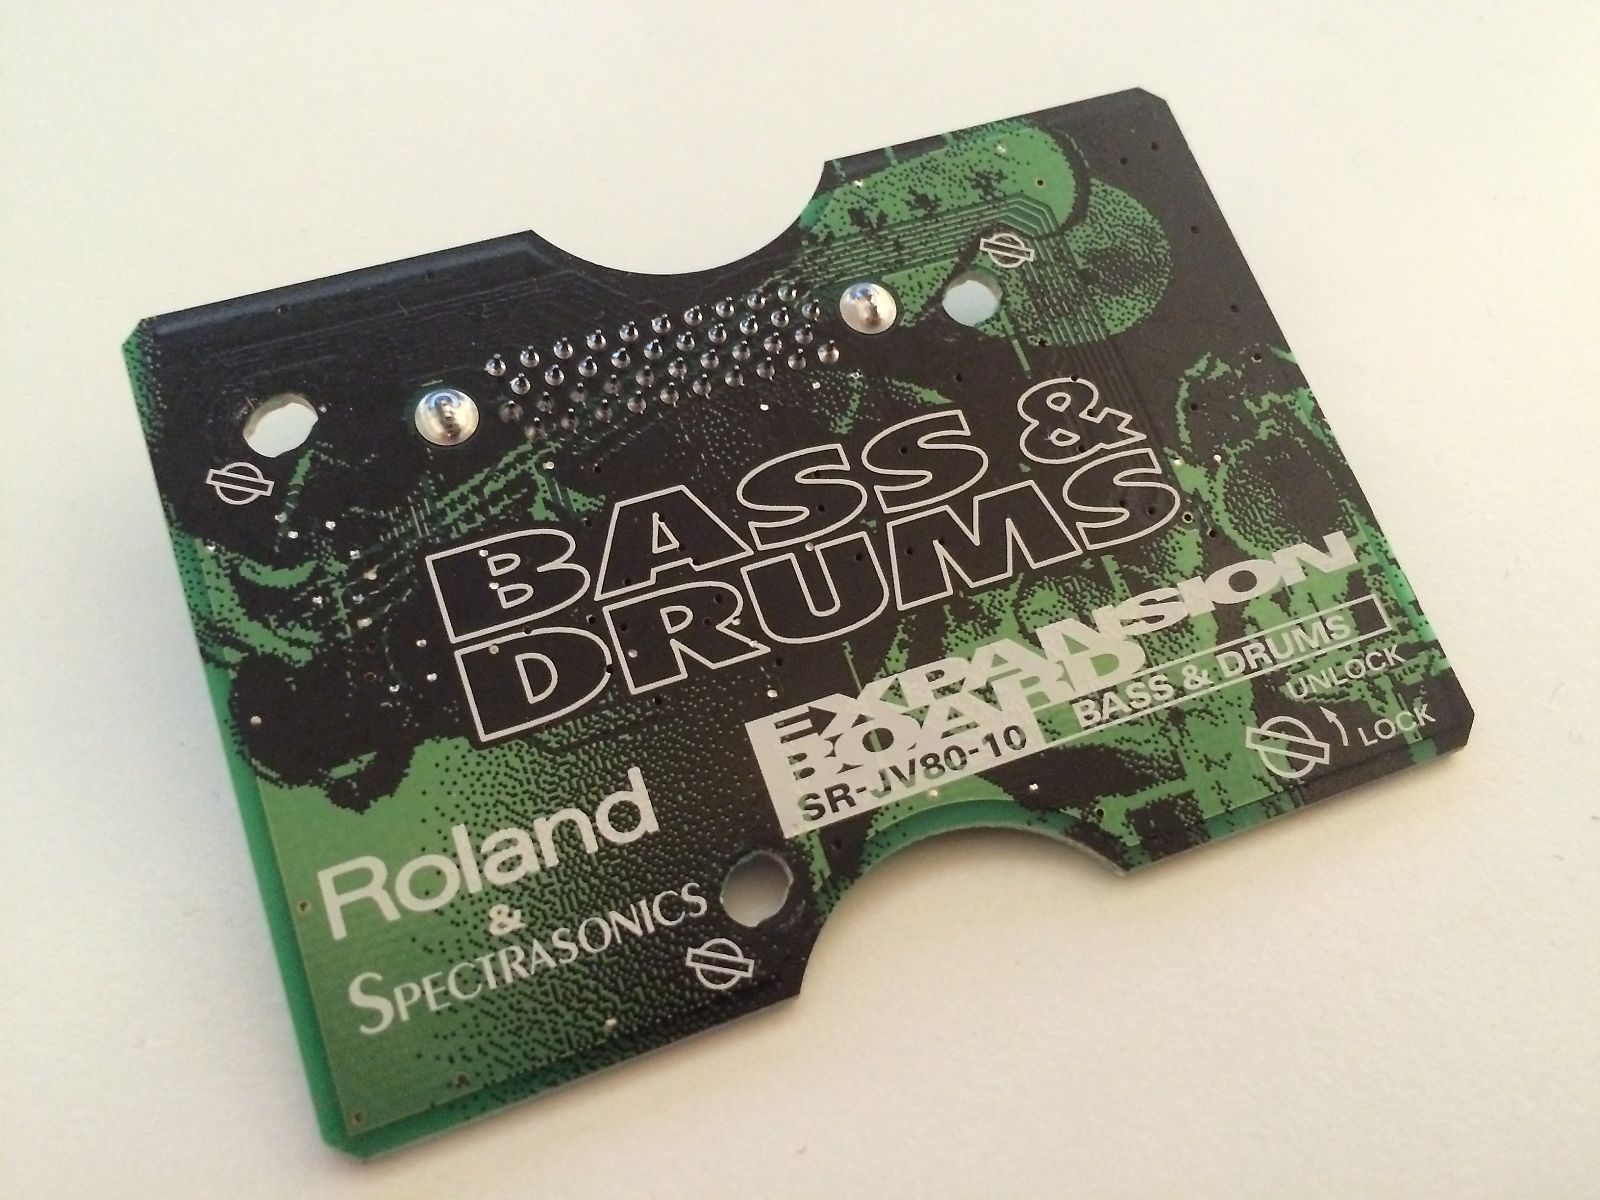 Roland SR-JV80-10 Bass and Drums Expansion Board | Reverb